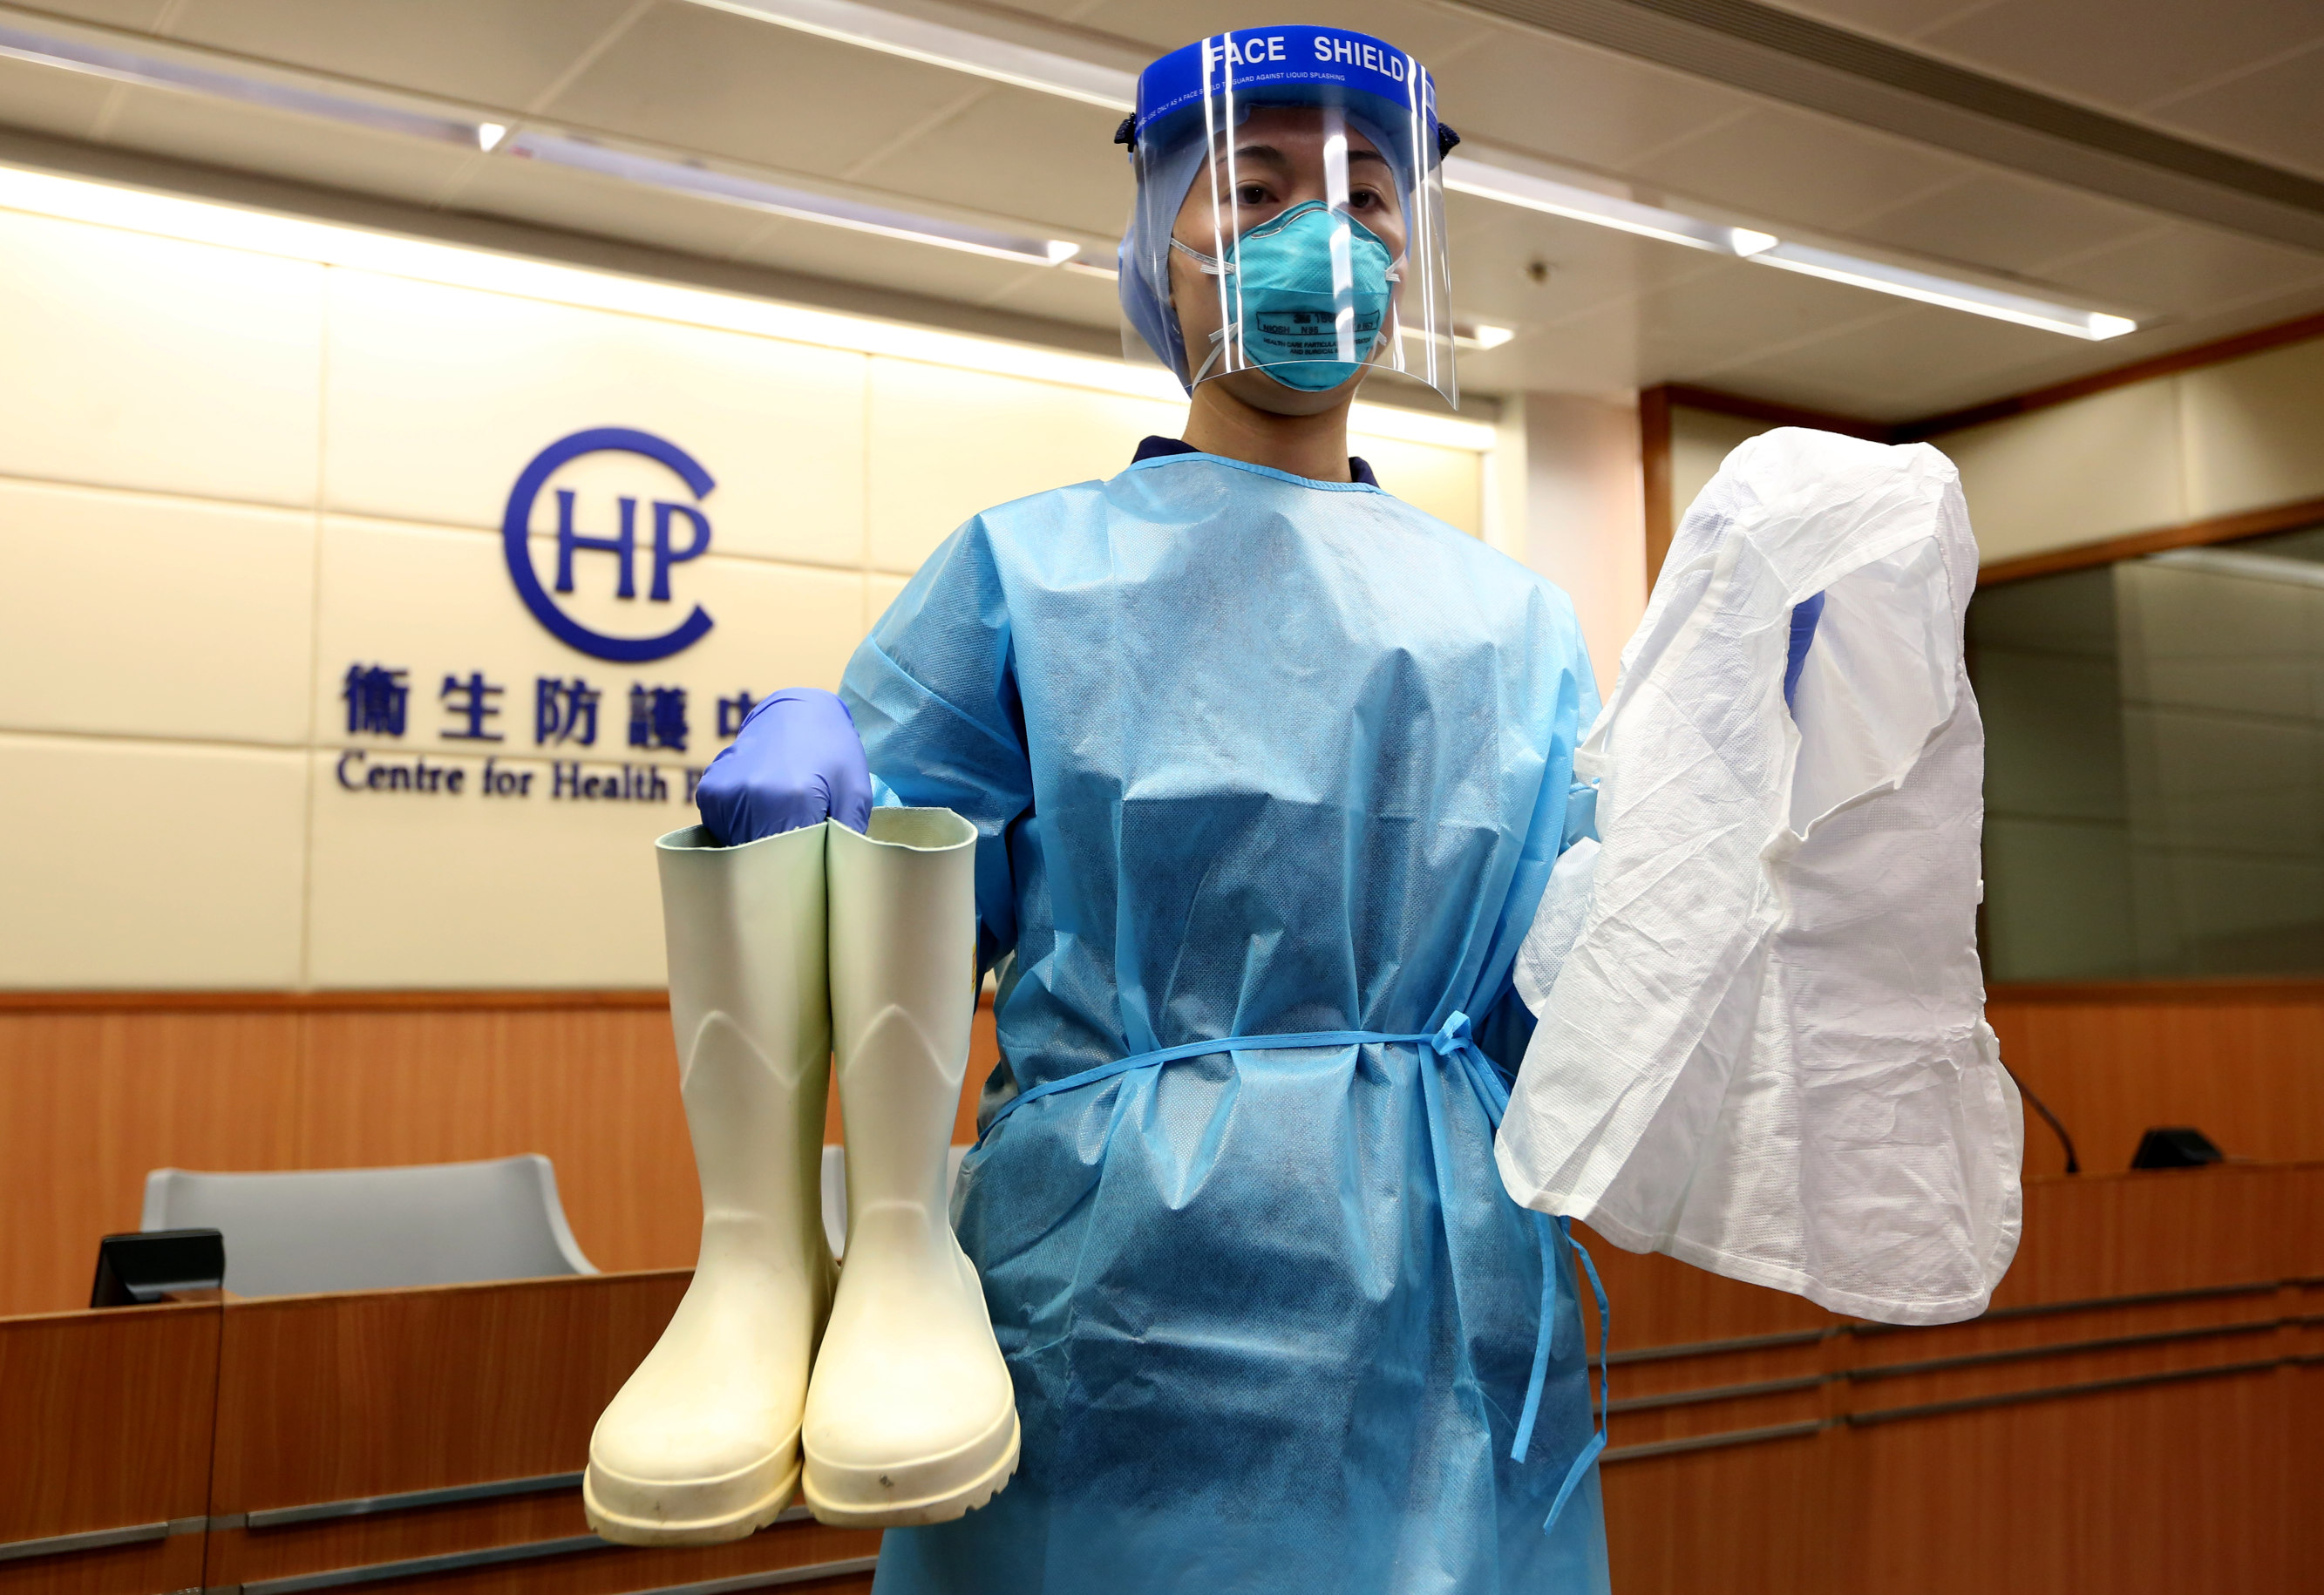 A nursing officer from the Hong Kong Health Department wears personal protective equipment recommended against the Ebola virus.